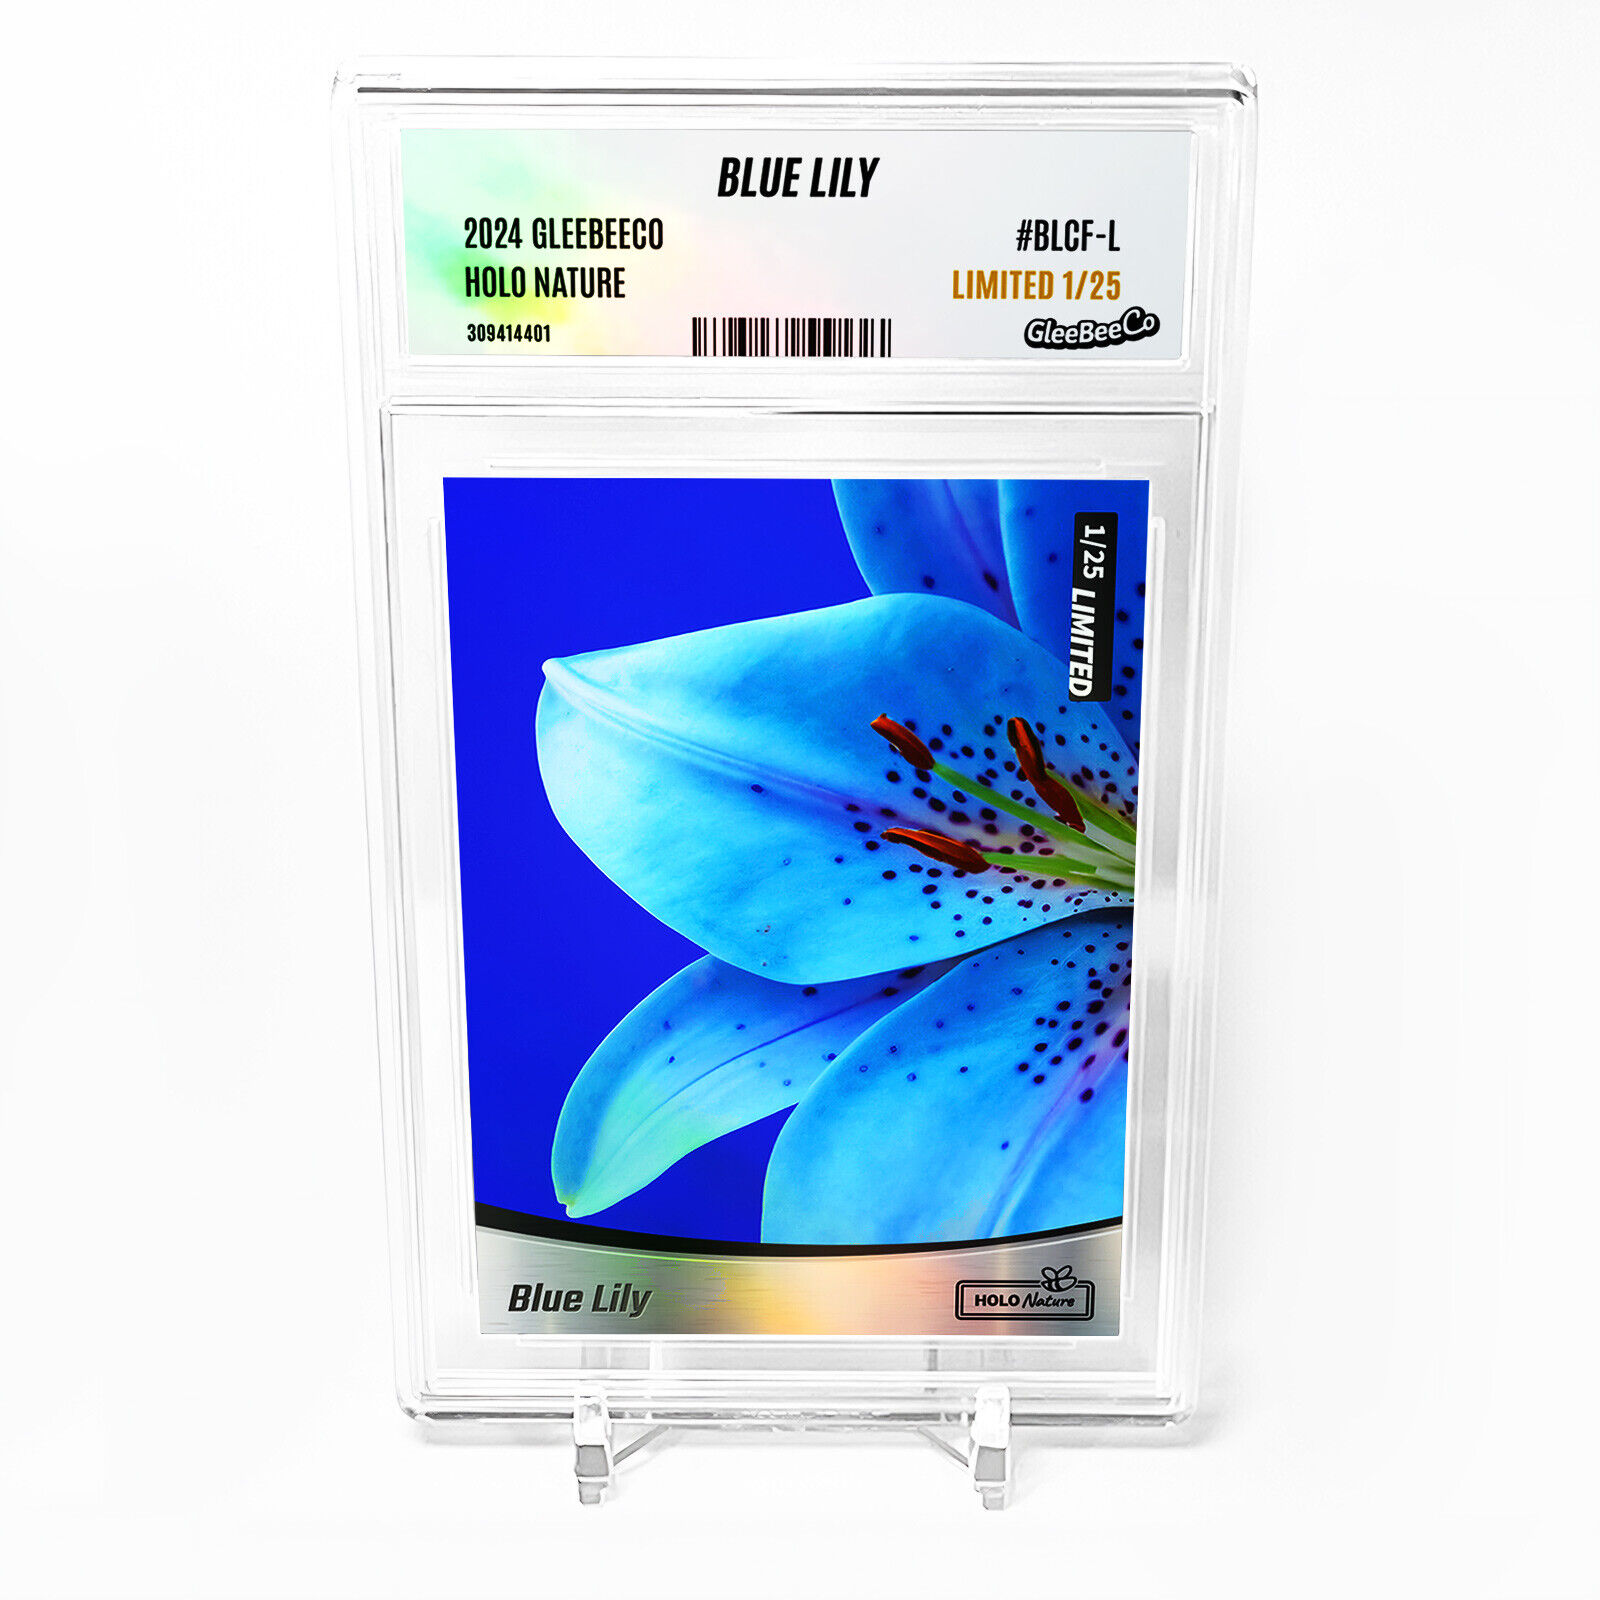 BLUE LILY Photo Card 2024 GleeBeeCo Holo Nature Up Close #BLCF-L /25 Made - Wow